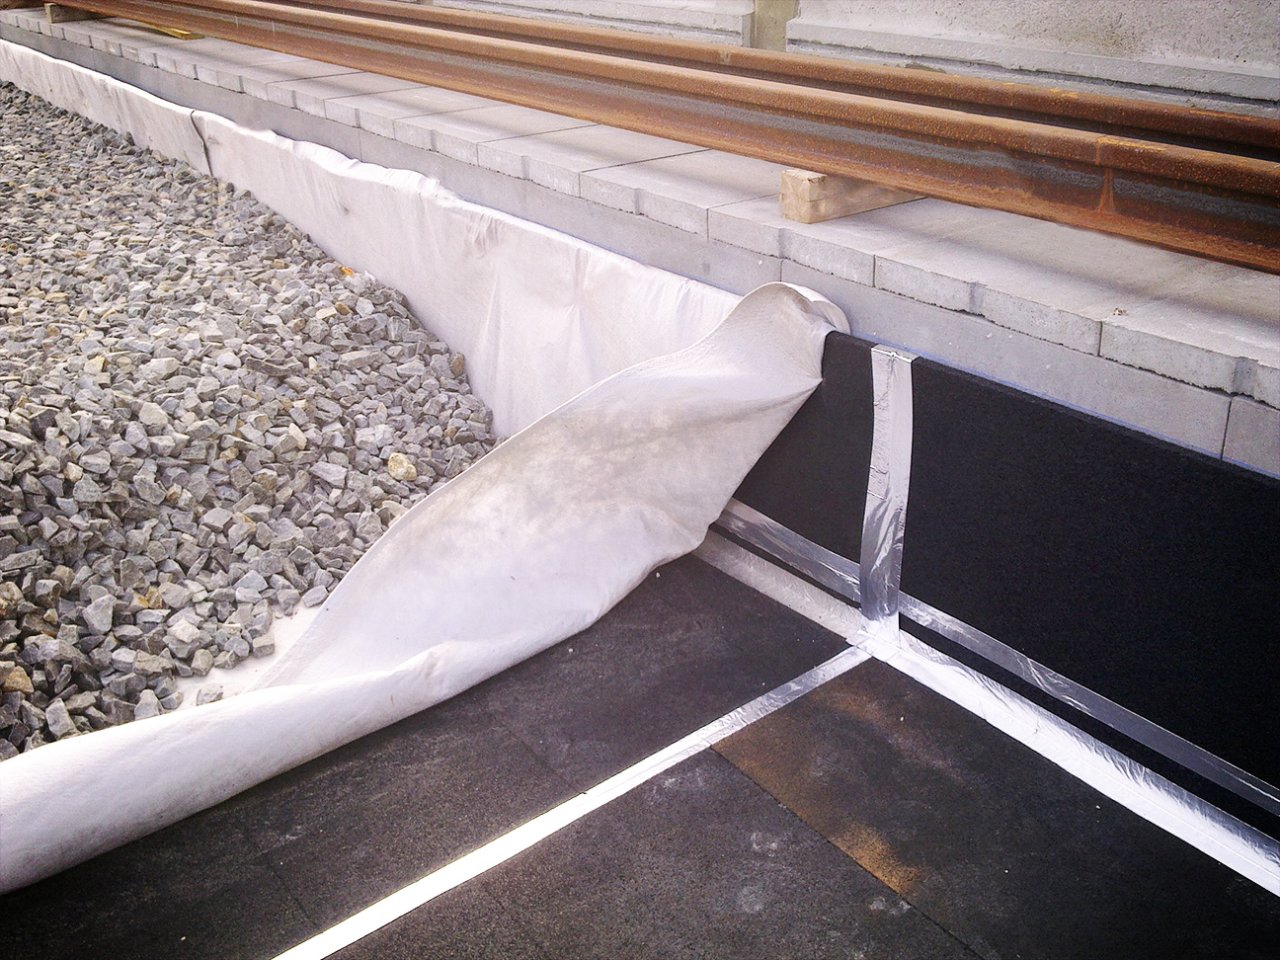 Picture ofmMats made from a vibration damping material laid out underneath the ballast while installing a new rail for trains.